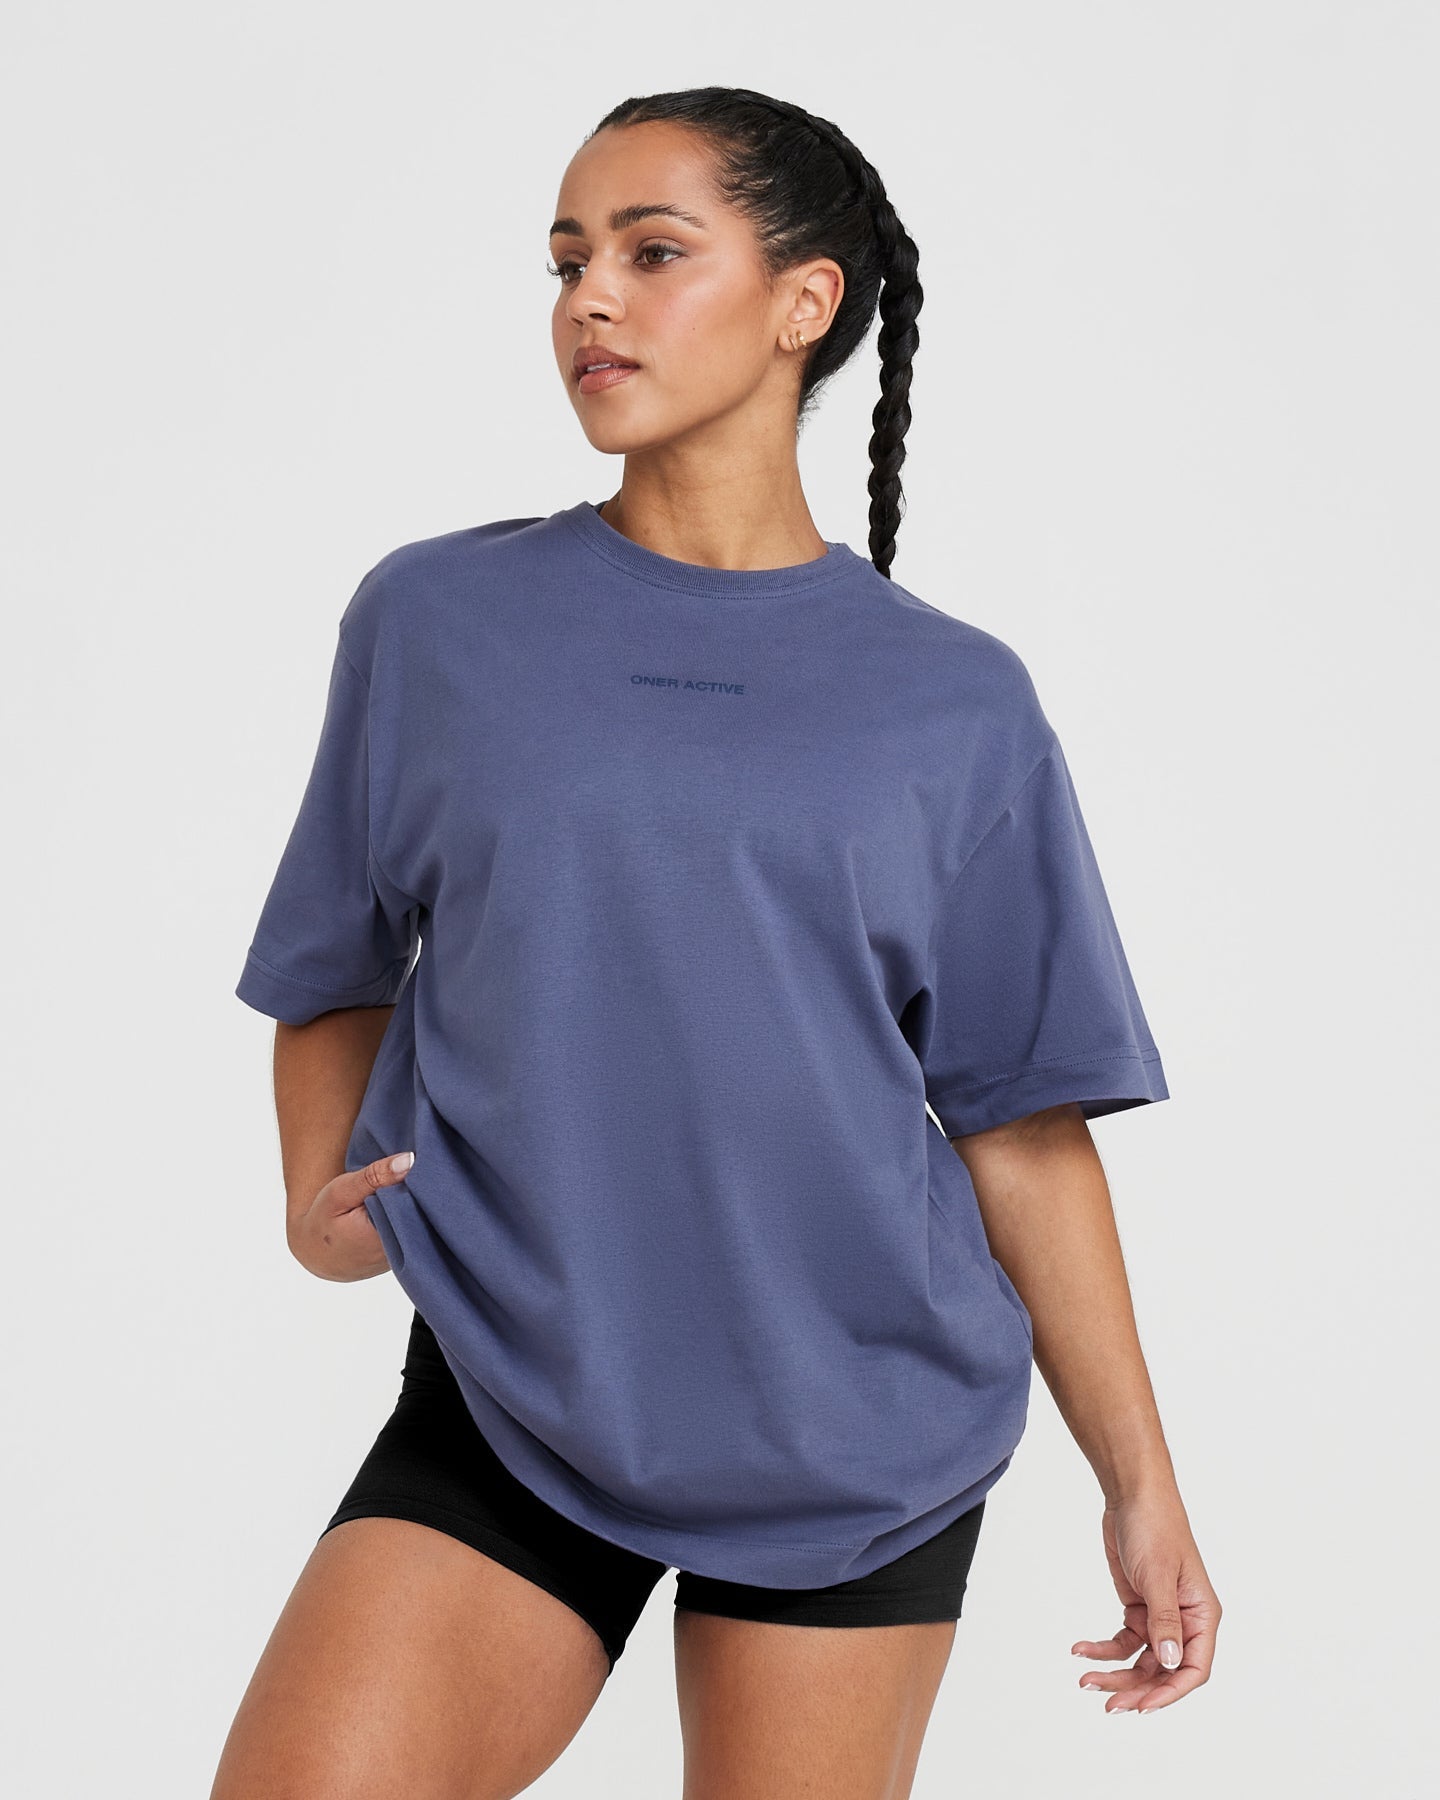 Classic Mirror Graphic Oversized T-Shirt Washed Slate Blue | Oner Active US